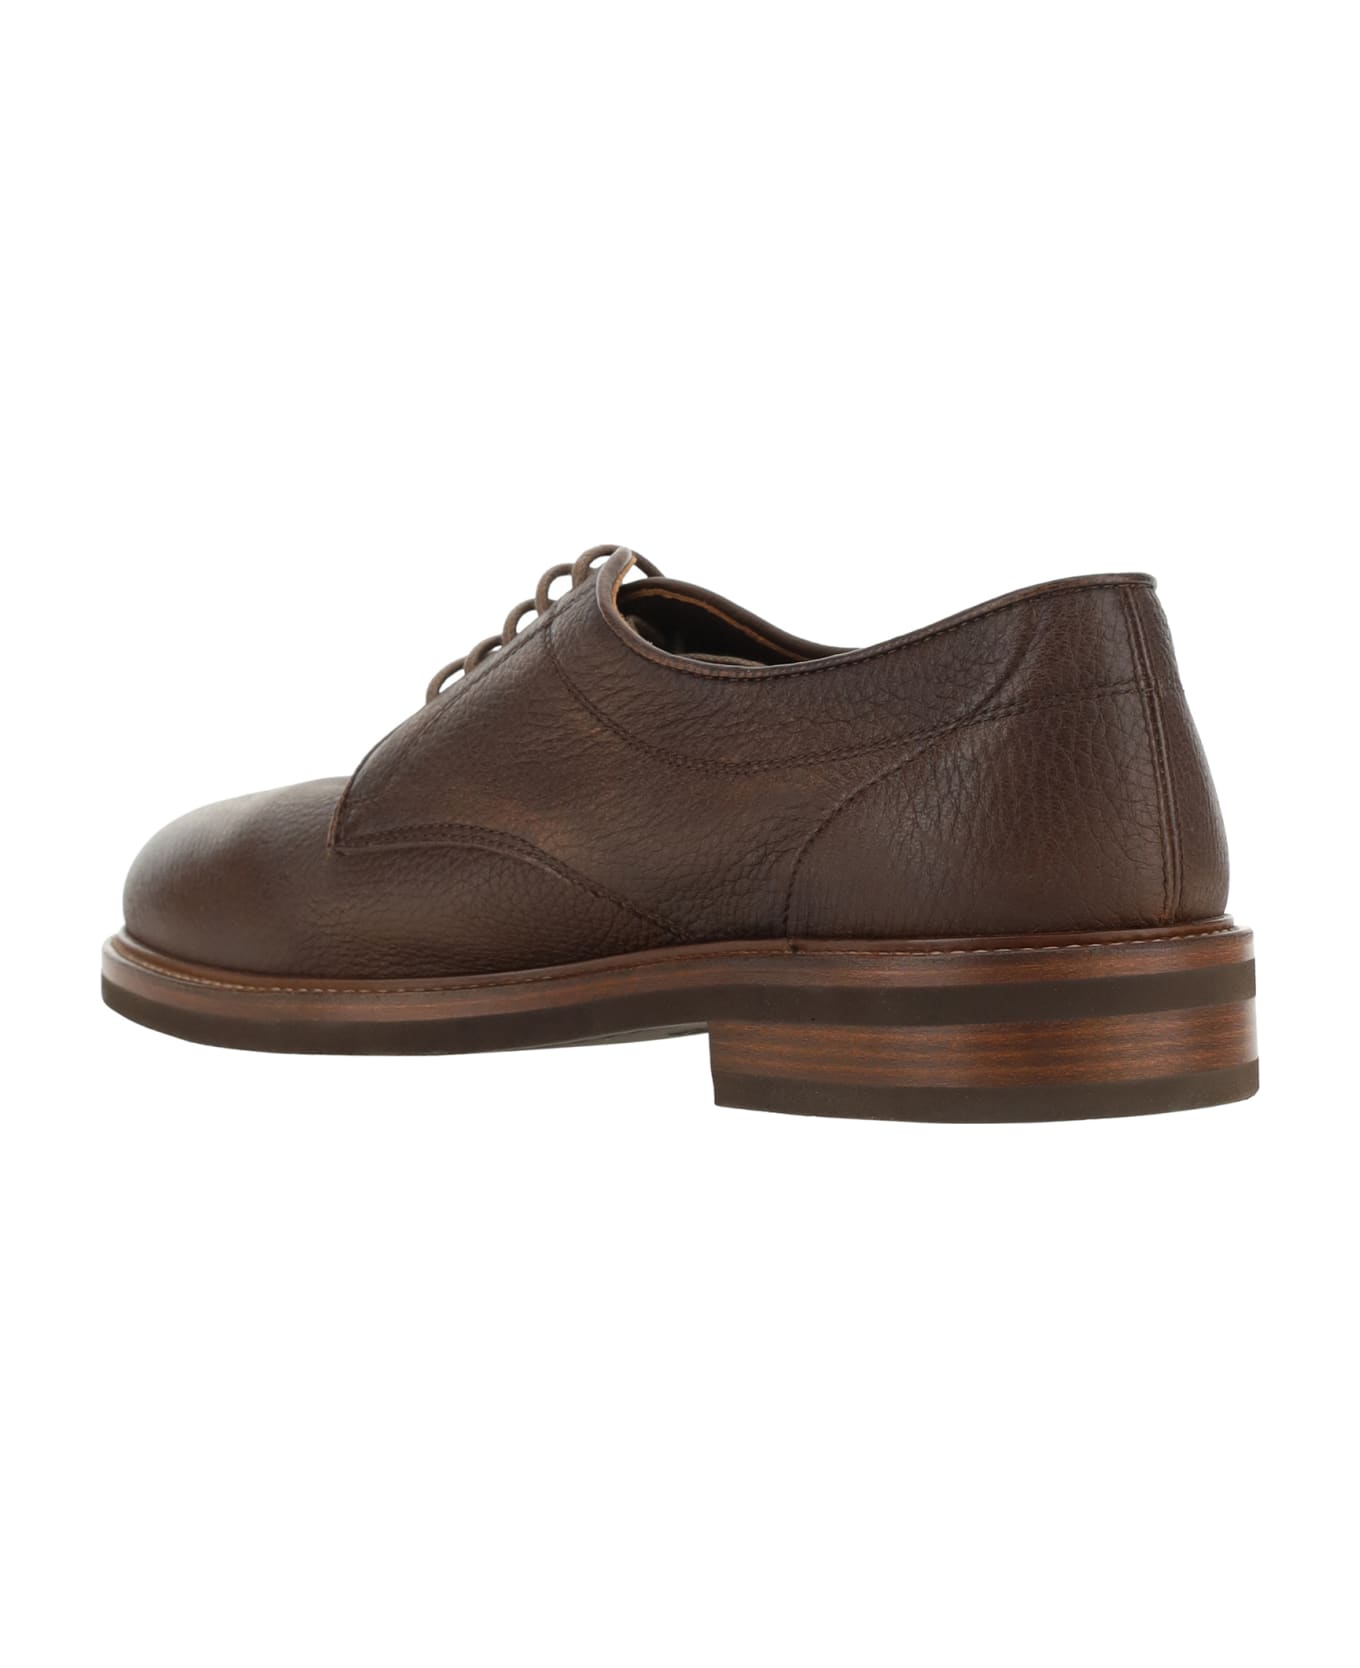 Brunello Cucinelli Lace-up Shoes Yellow - Tabacco